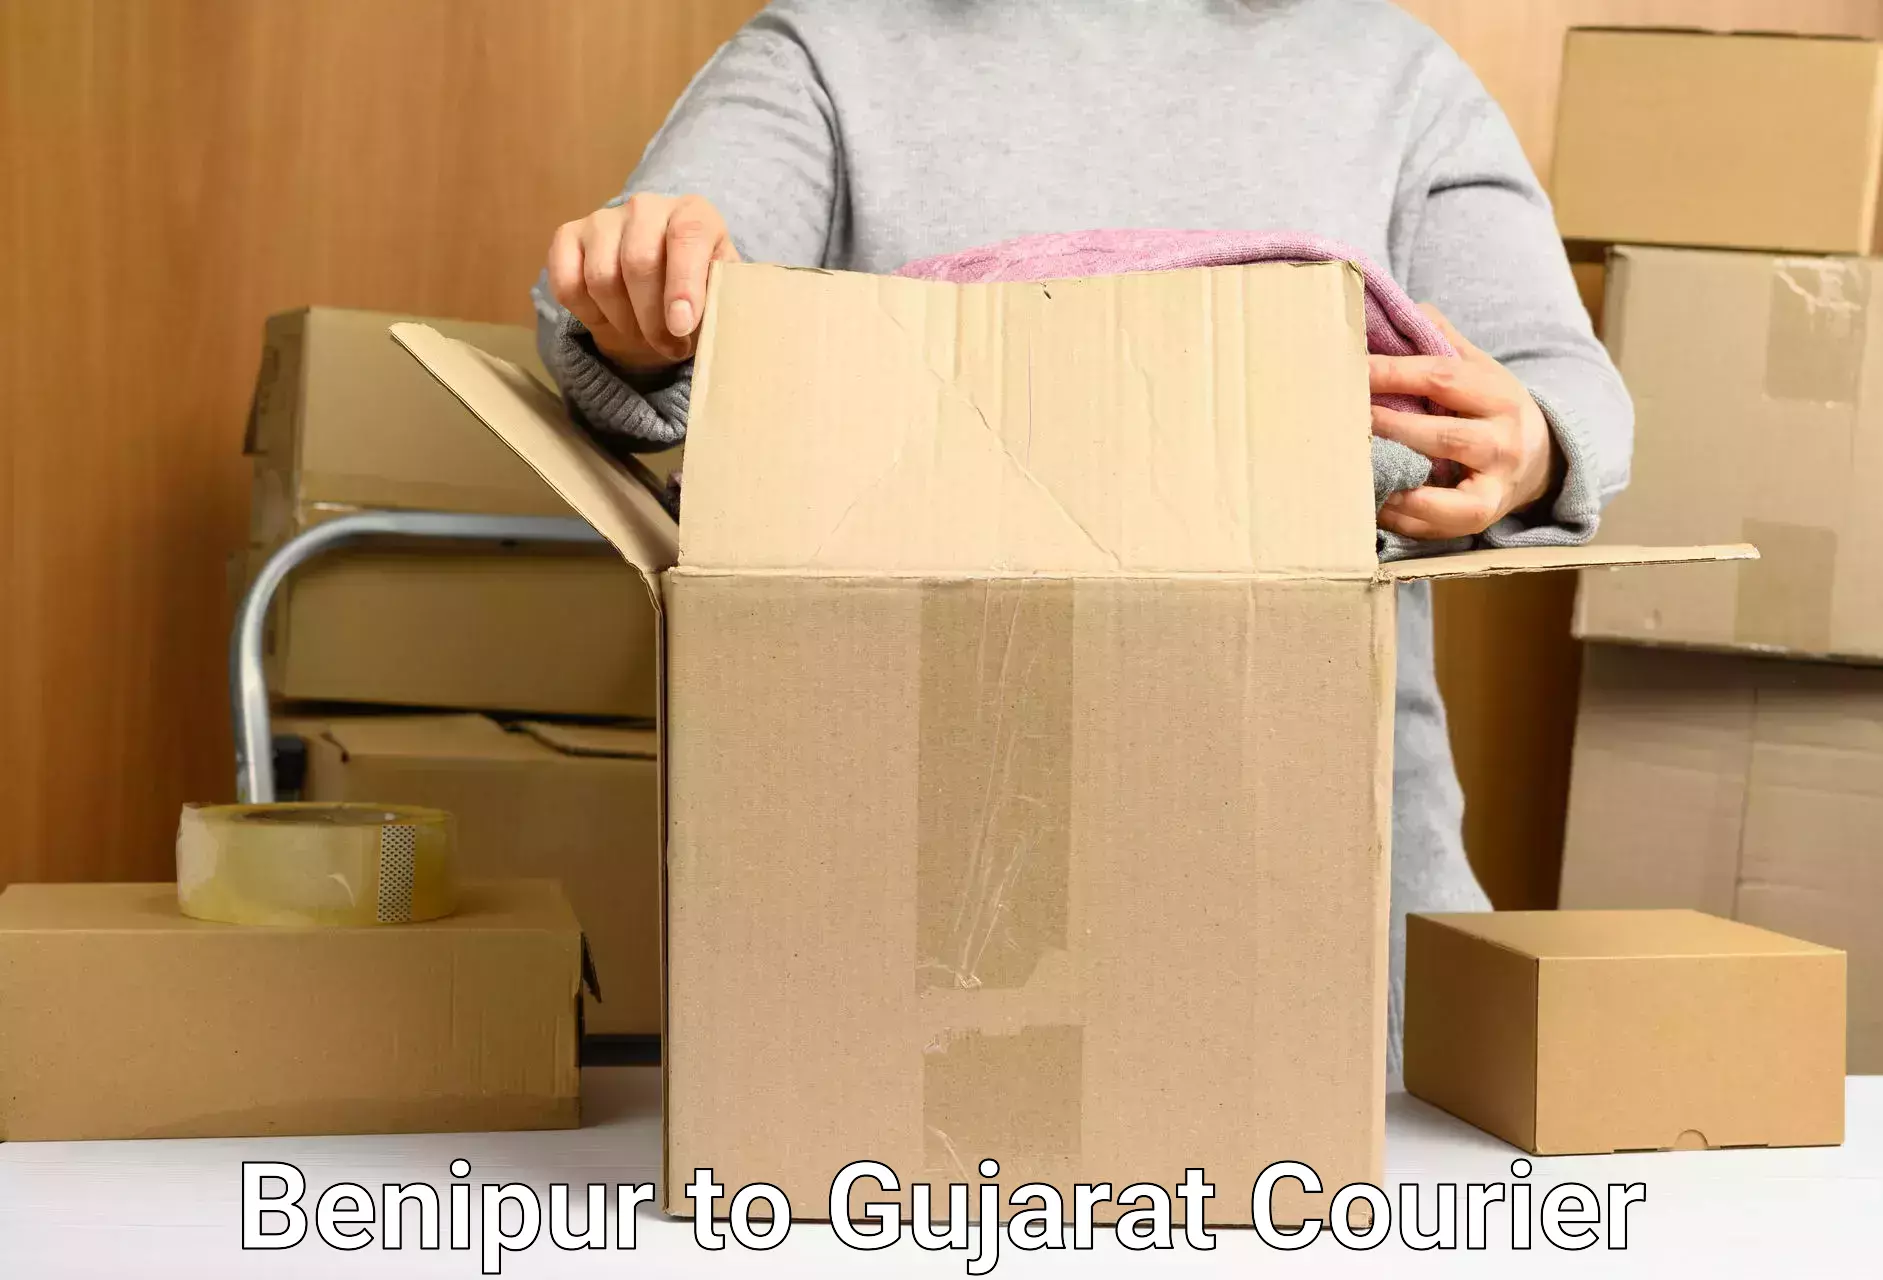 Same-day delivery options Benipur to Gujarat